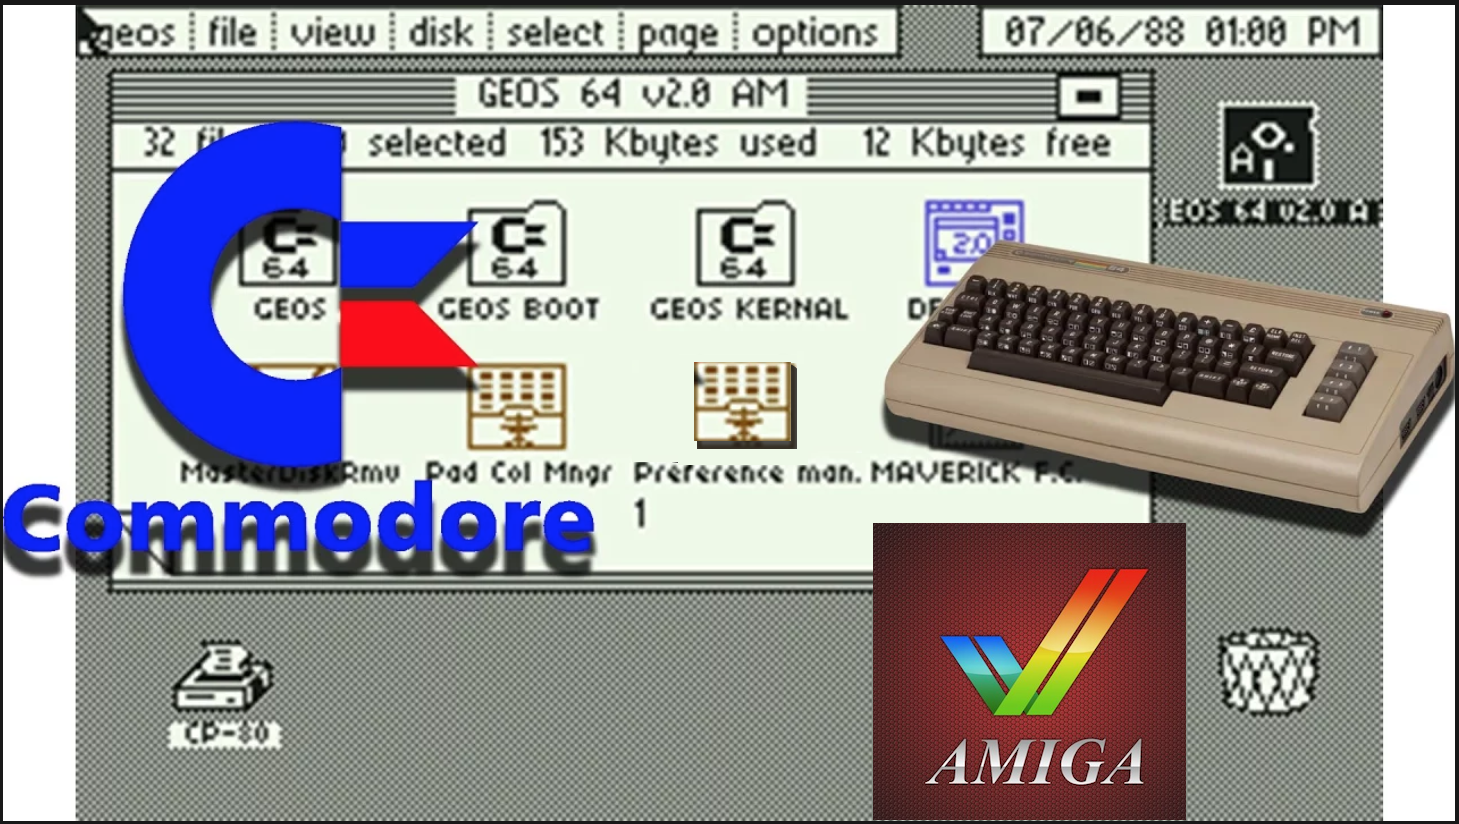 Amiga1200-4000 whdload titles, 64GB SD Card - CF Card for KS3.1-3.2 with Commodore 64 GEOS